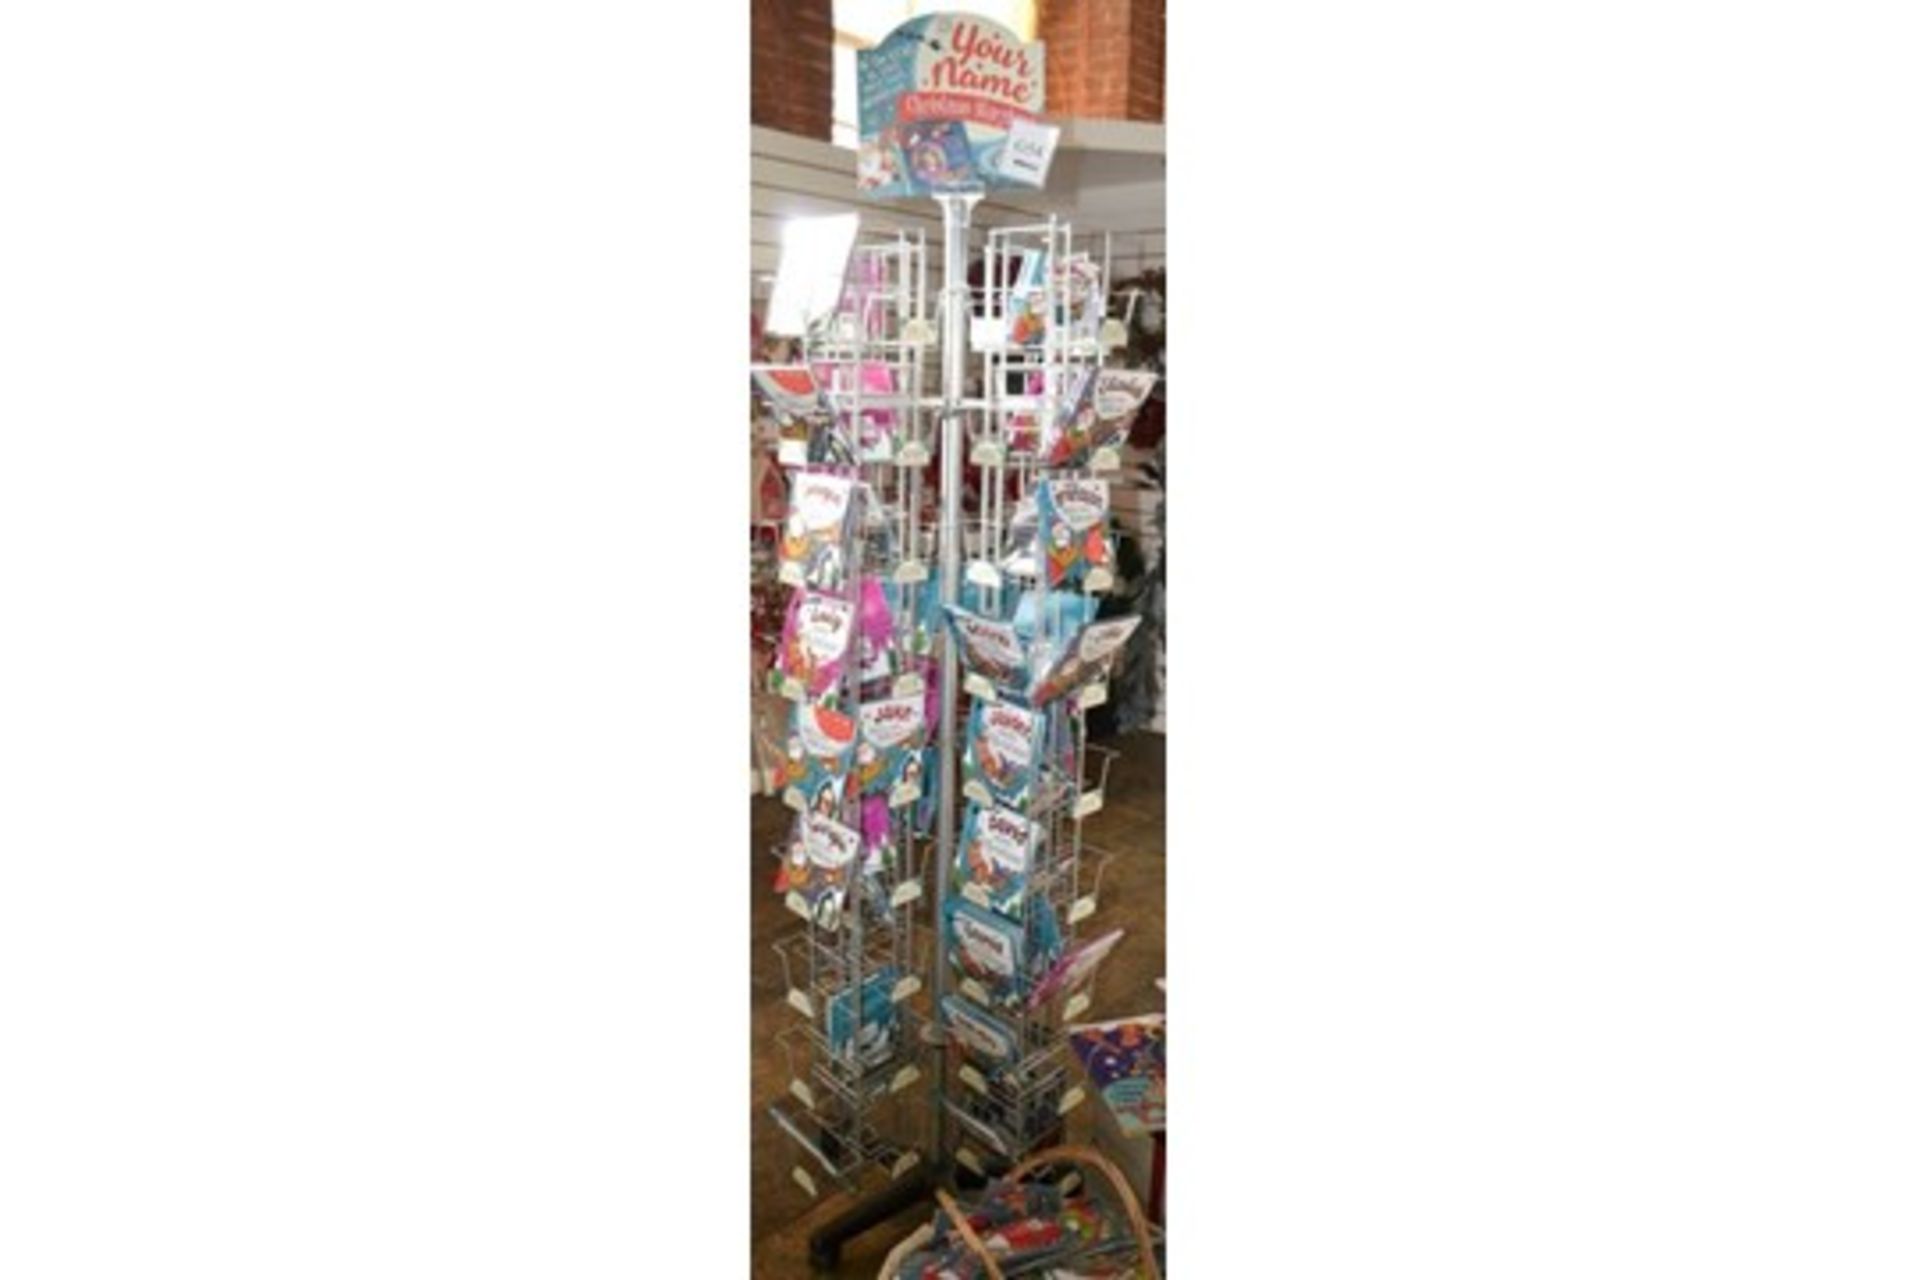 27 x Retail Carousel Display Stands With Approximately 2,800 Items of Resale Stock - Includes - Image 23 of 61